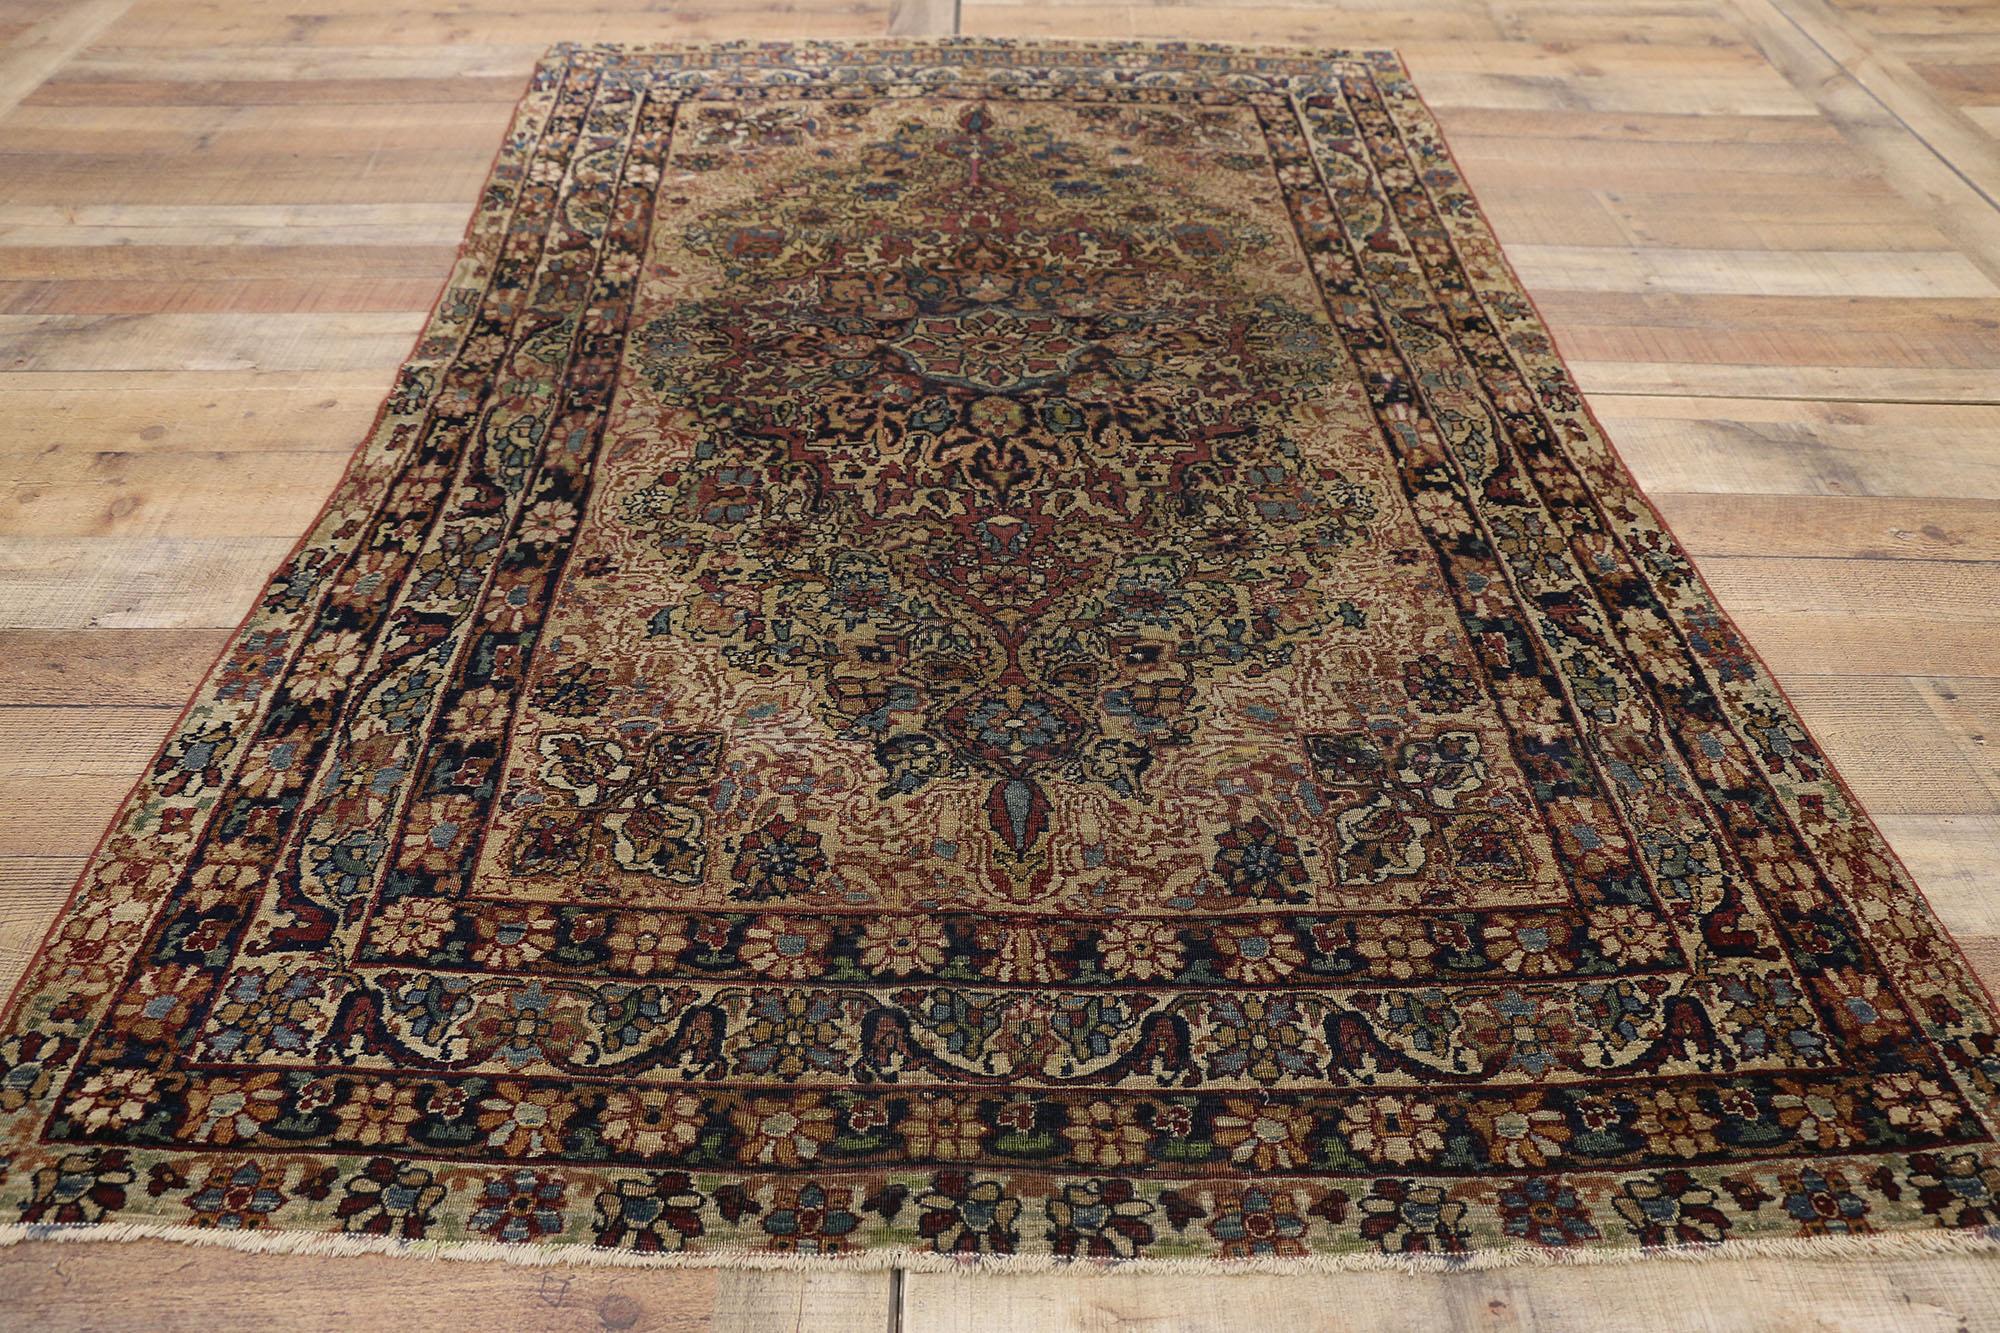 19th Century Distressed Antique Persian Kerman Rug with Industrial Speakeasy Style For Sale